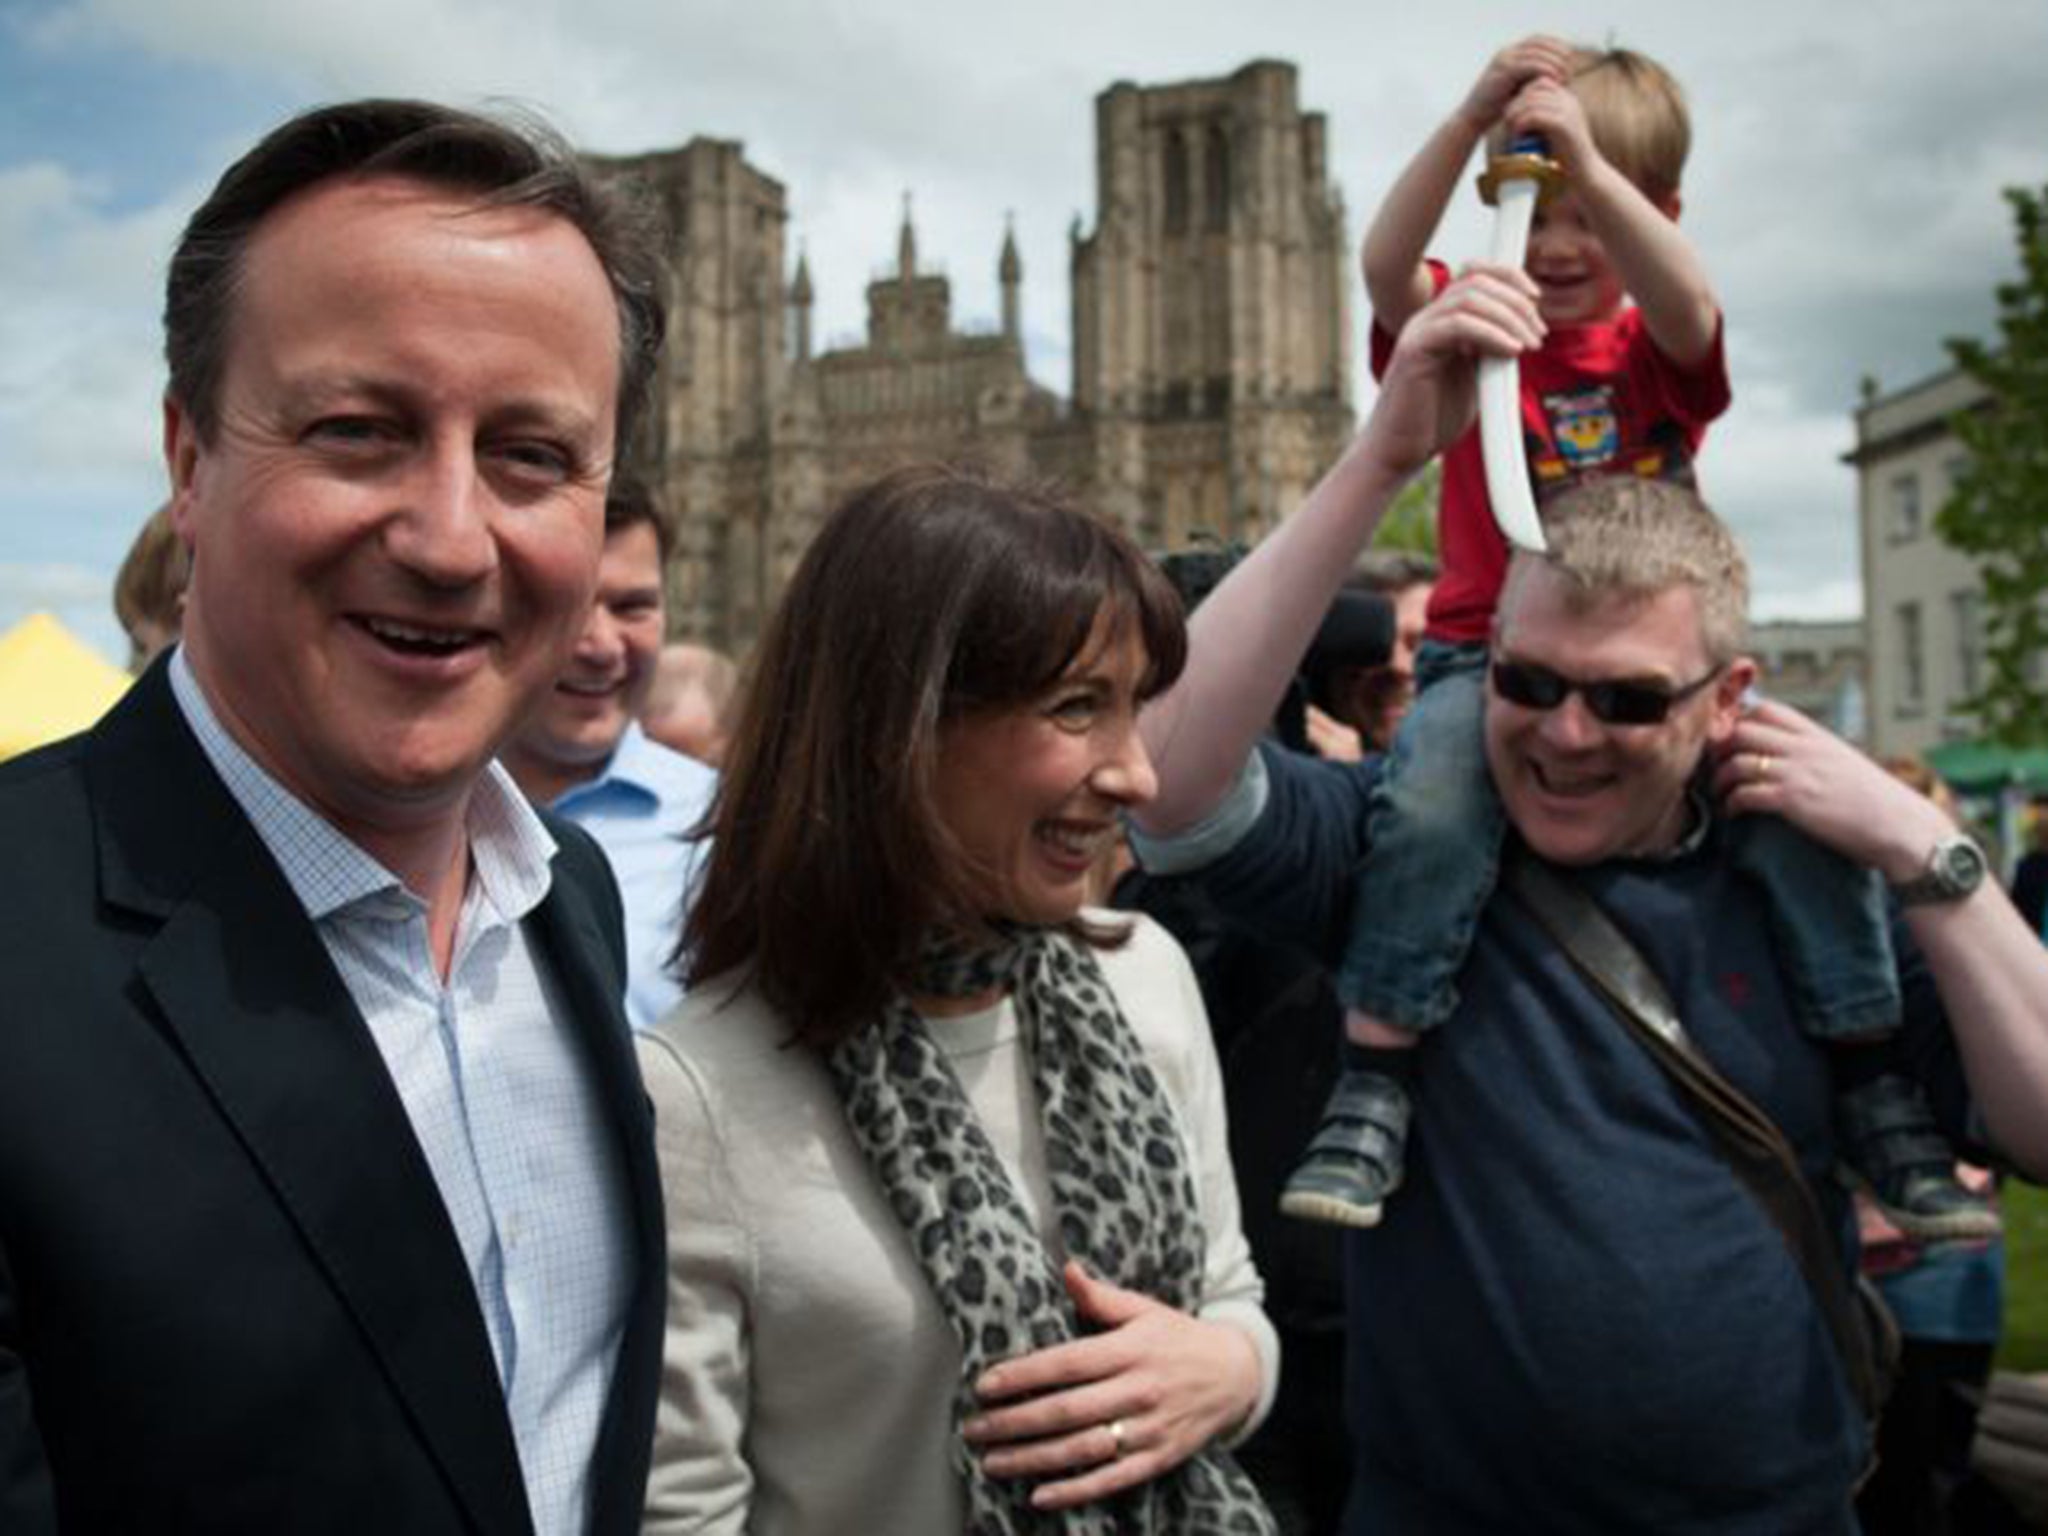 David and Samantha Cameron visit Wells in Somerset during the final week of campaigning